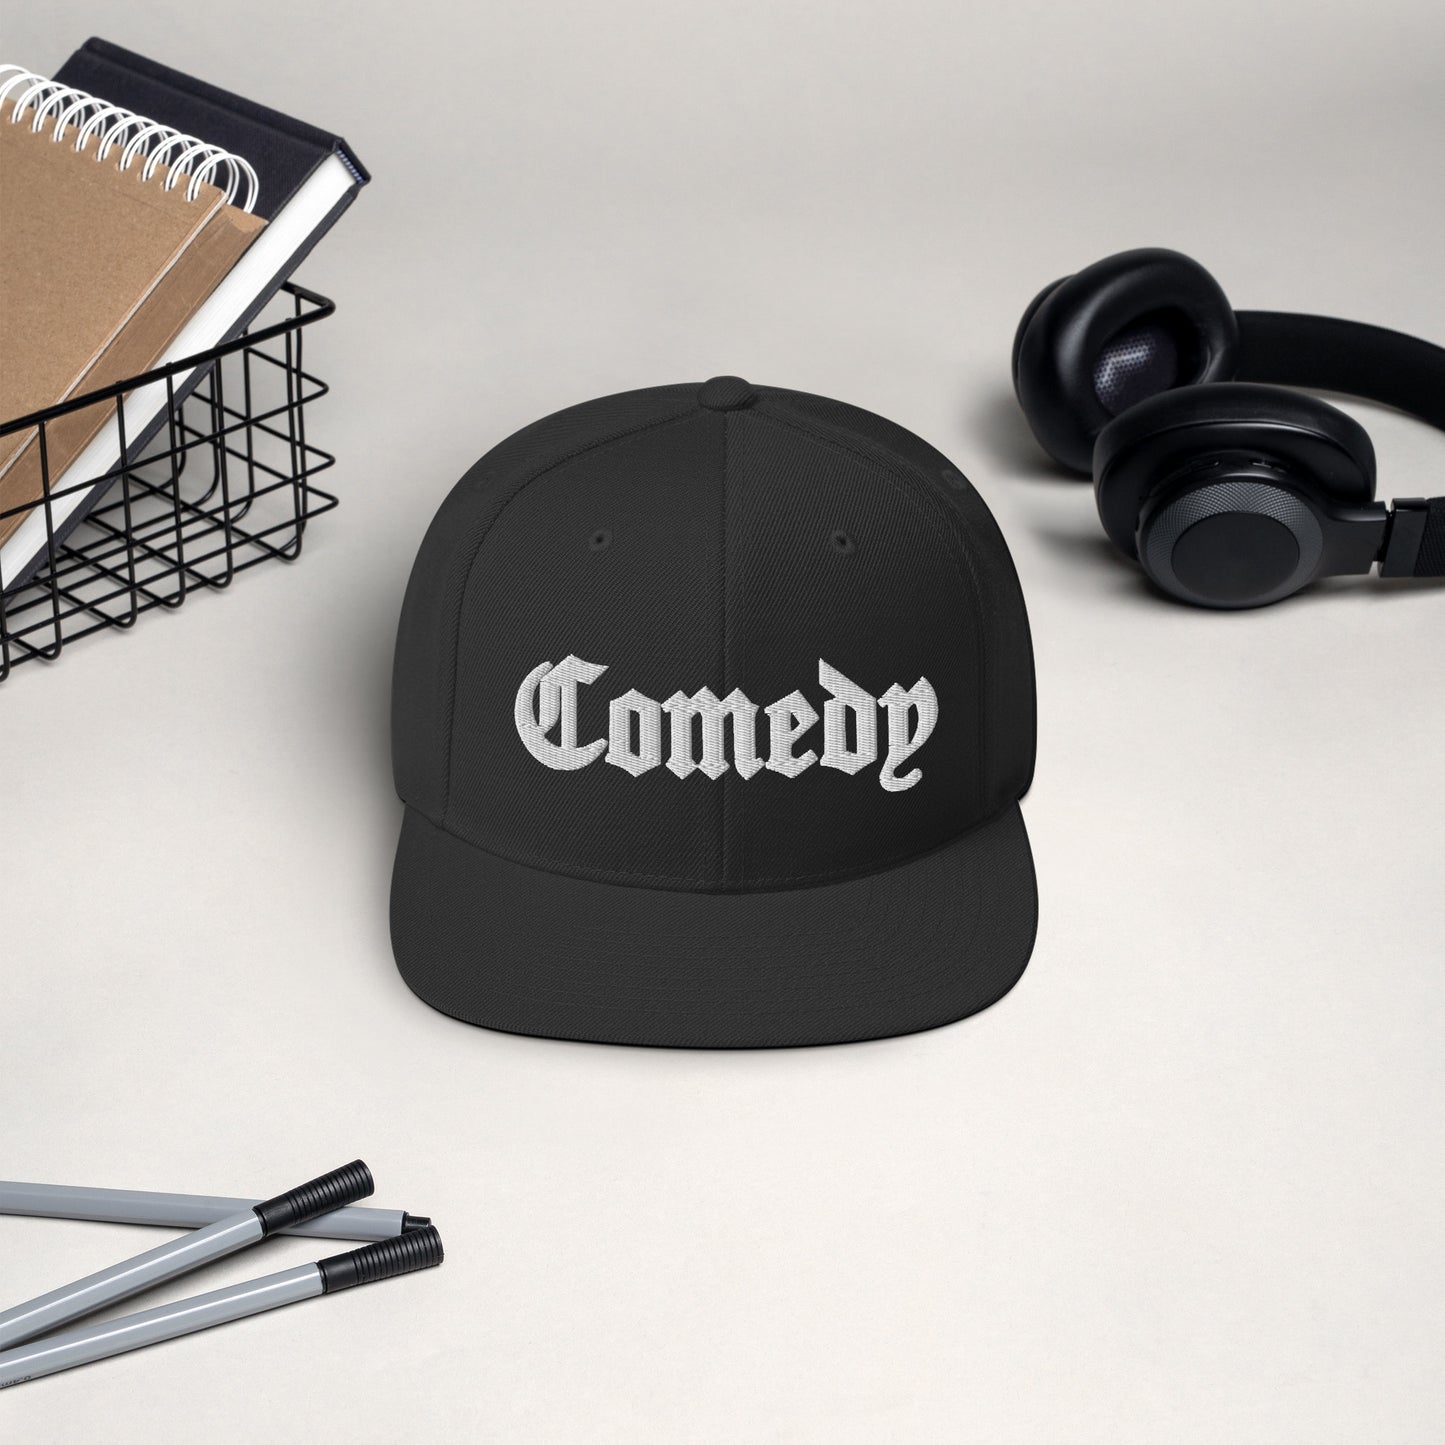 Black Snapback with Attitude - Comedy the Brand - Retro Style Stand-Up Comedy Fan Gear